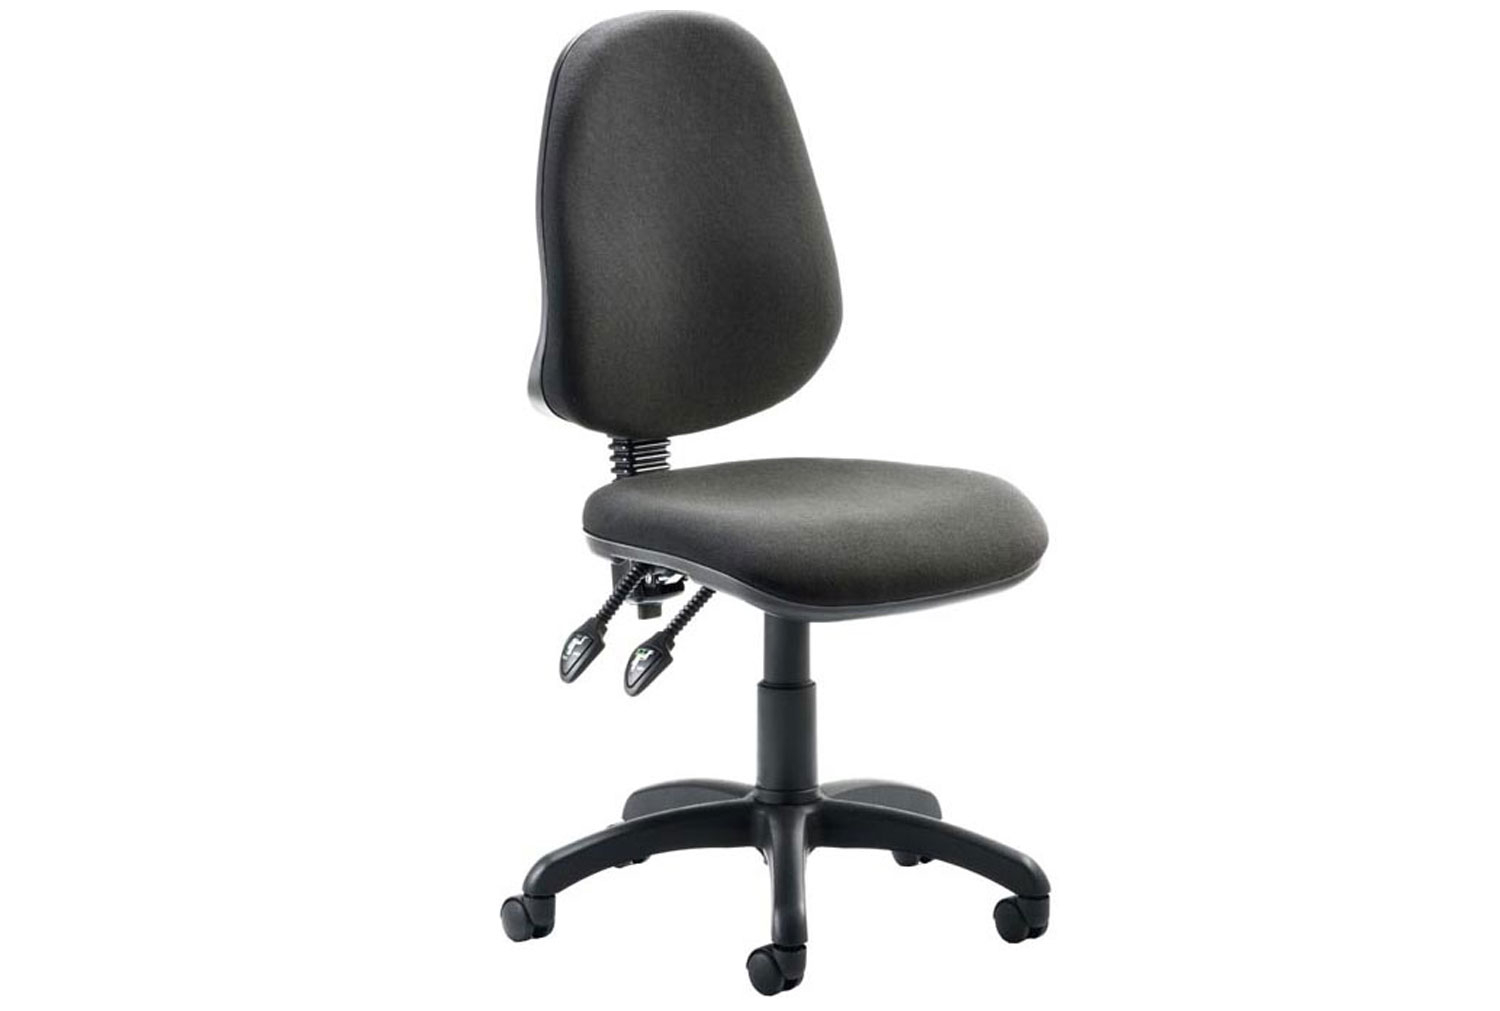 Lunar 2 Lever Operator Office Chair With No Arms, Black, Express Delivery